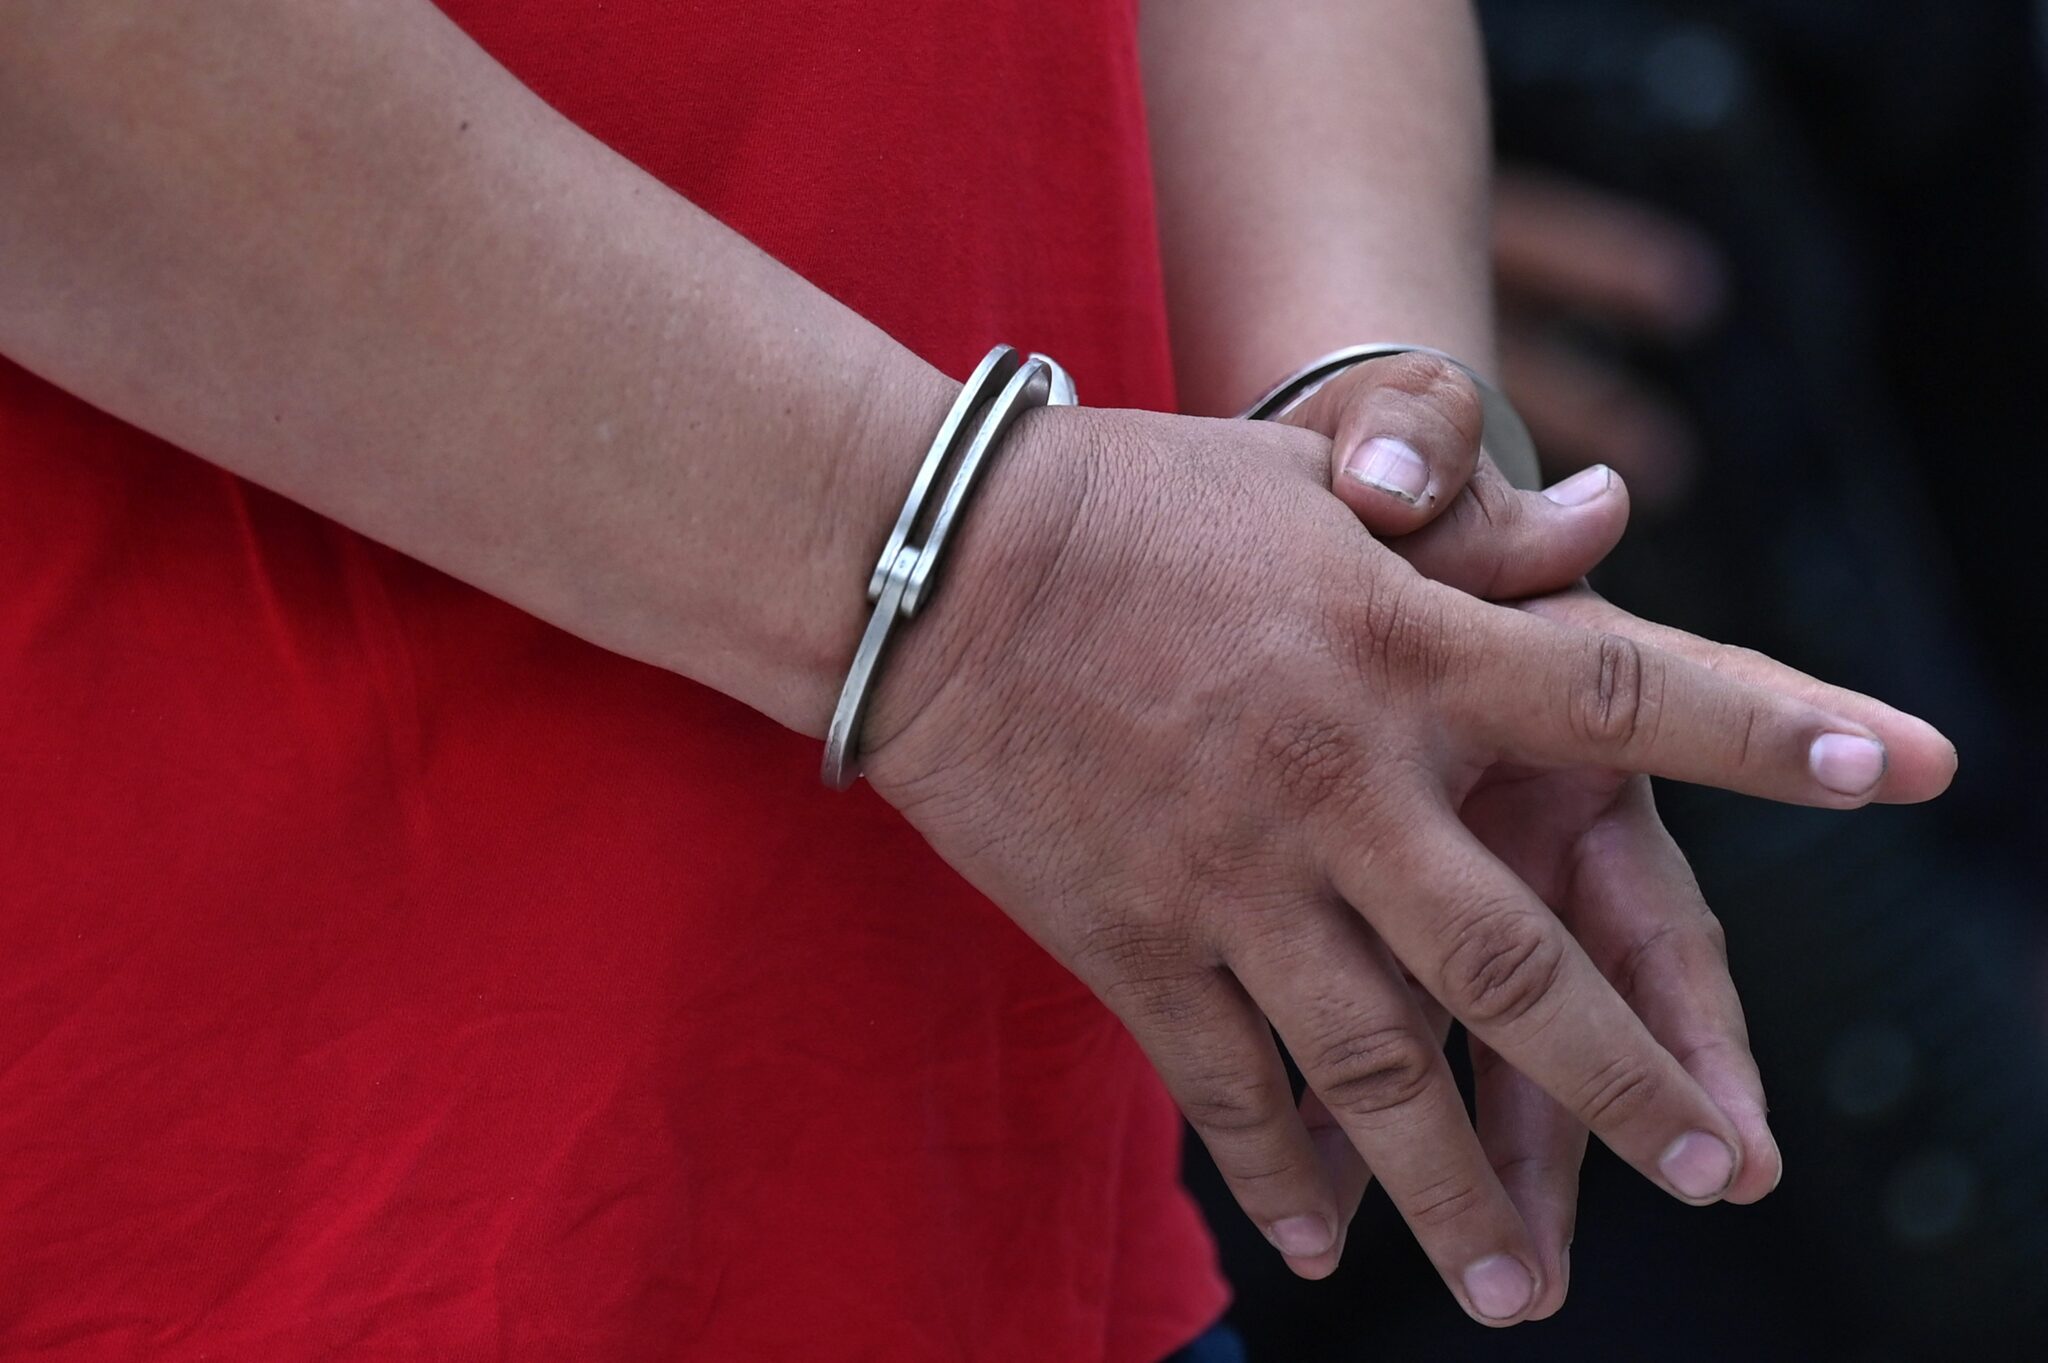 A man is seen handcuffed after being arrested by the national civil police on corruption charges in San Salvador on April 26, 2021. - The Salvadoran National Civil Police (PNC), Attorney General's Office (FGR) and Ministry of Justice and Security carried out an operation called Monarca (Monarch), in which 16 people were captured, including two mayors and a former deputy accused of corruption. (Photo by MARVIN RECINOS / AFP) (Photo by MARVIN RECINOS/AFP via Getty Images)